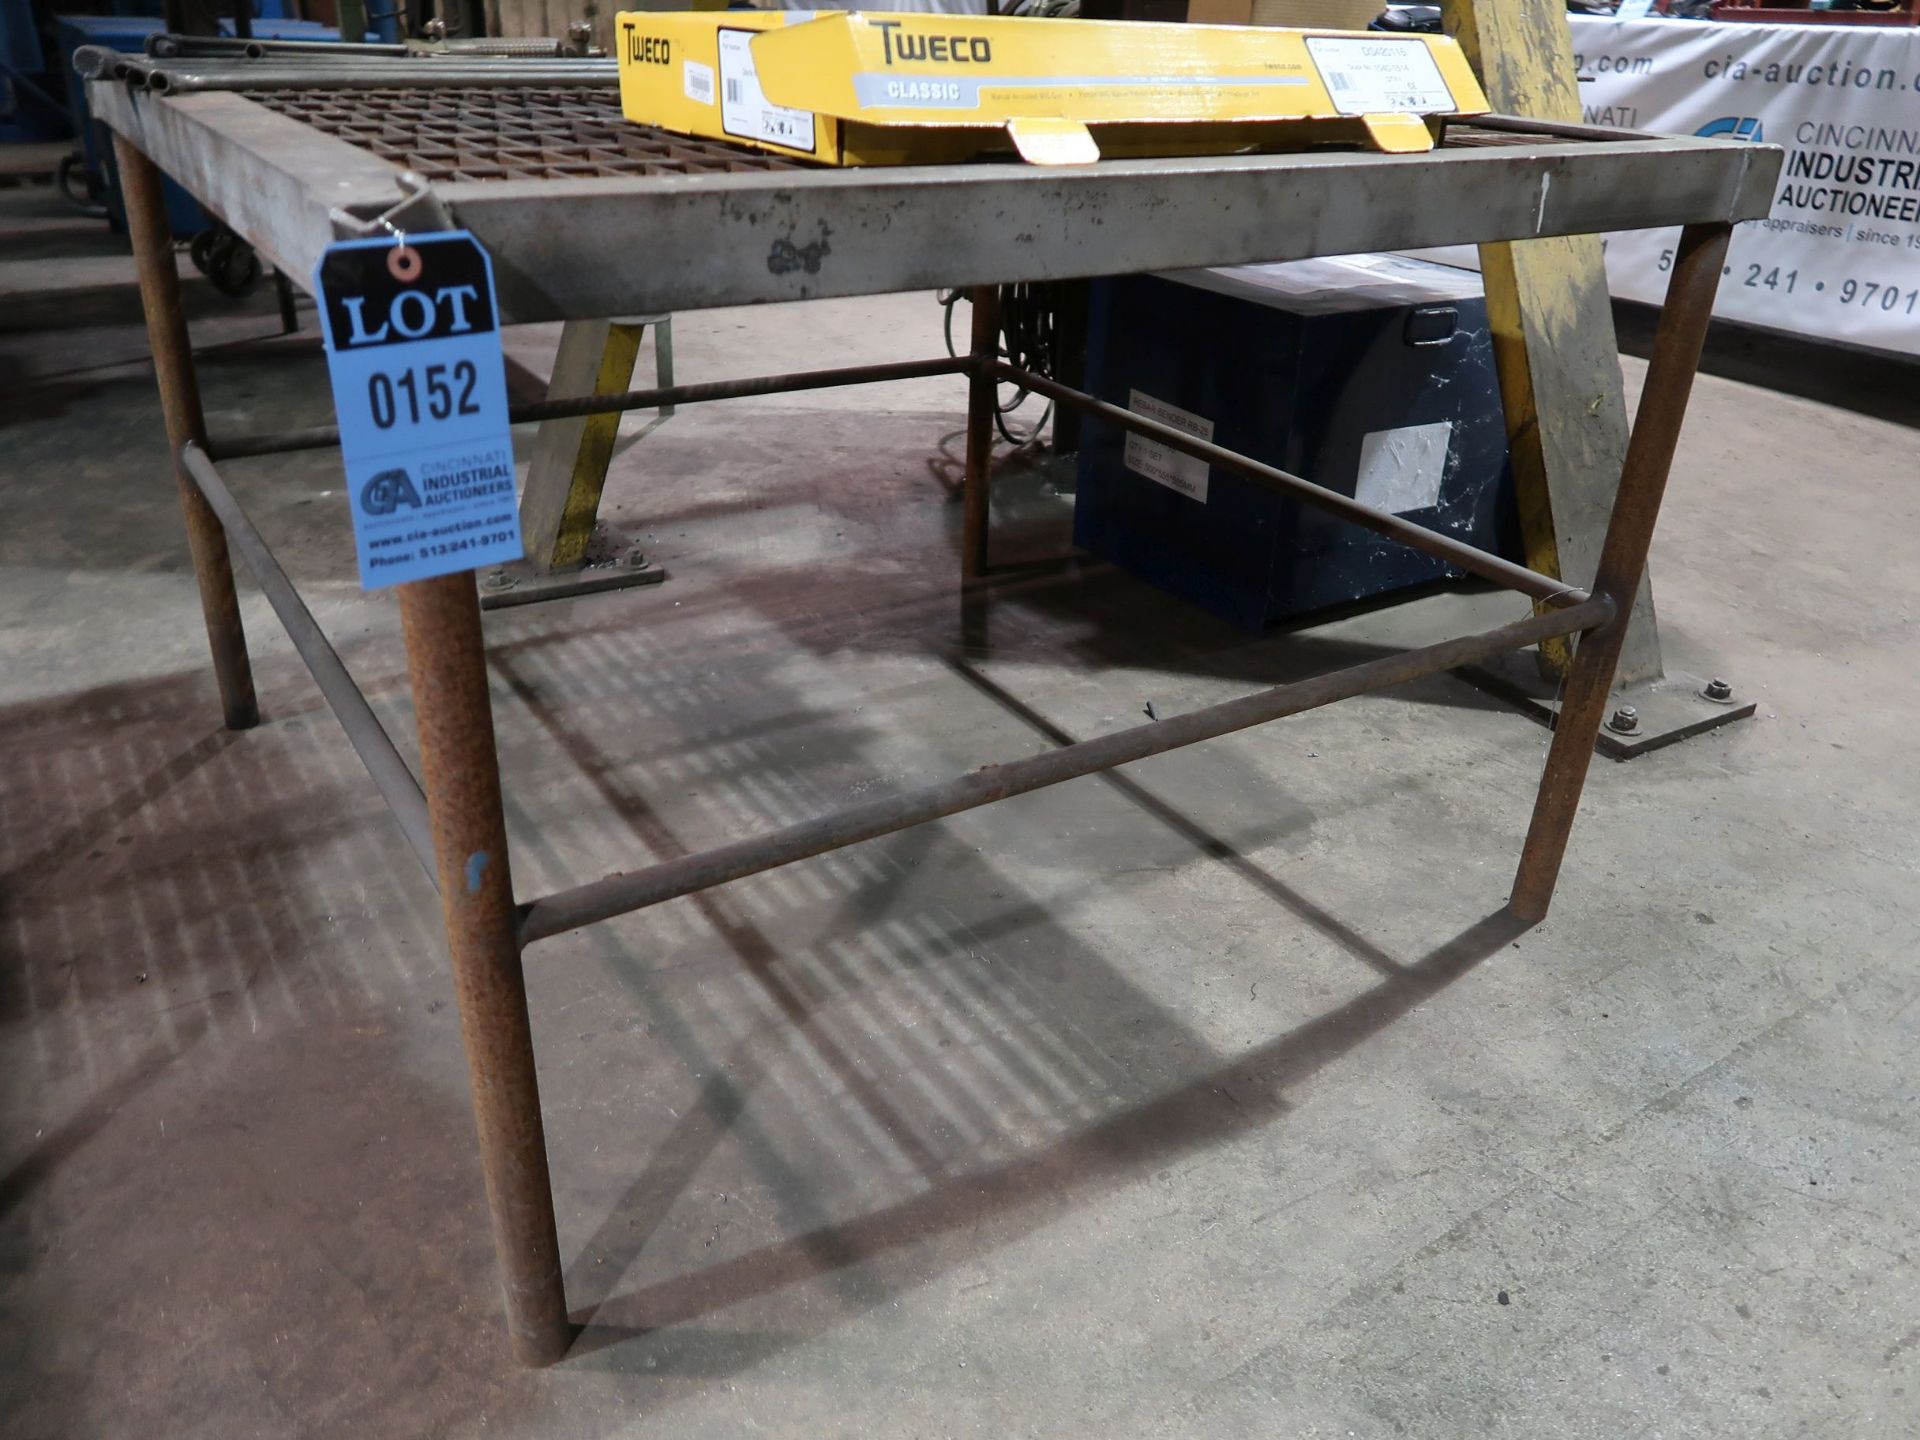 48" X 50" X 32" HIGH STEEL FRAME GRATED TOP WELDING TABLE